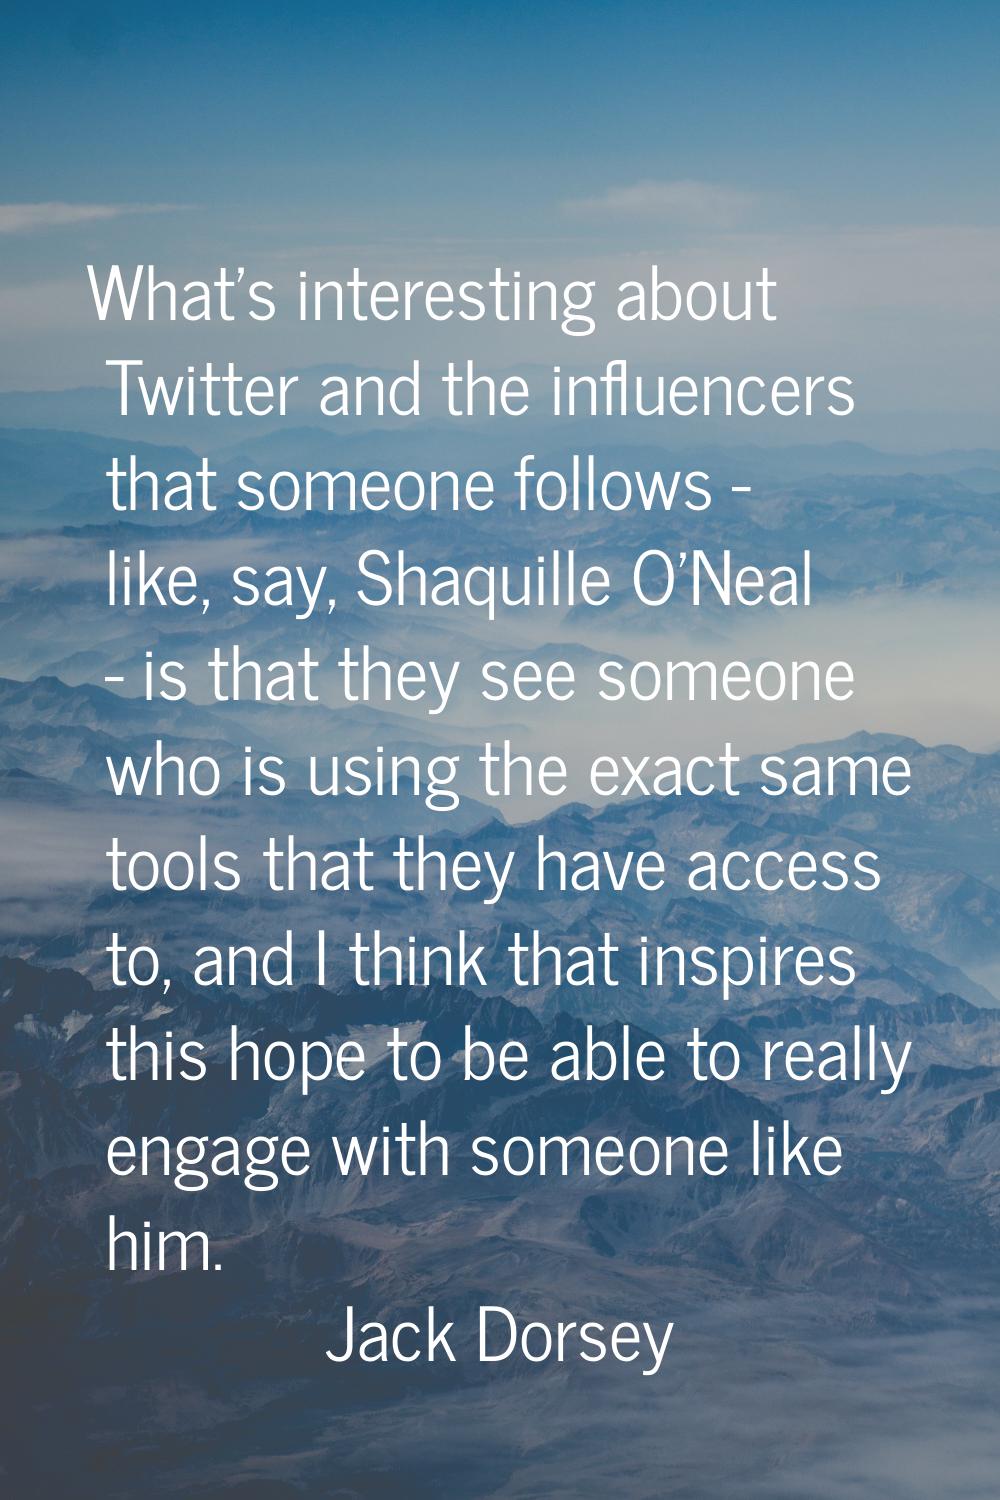 What's interesting about Twitter and the influencers that someone follows - like, say, Shaquille O'